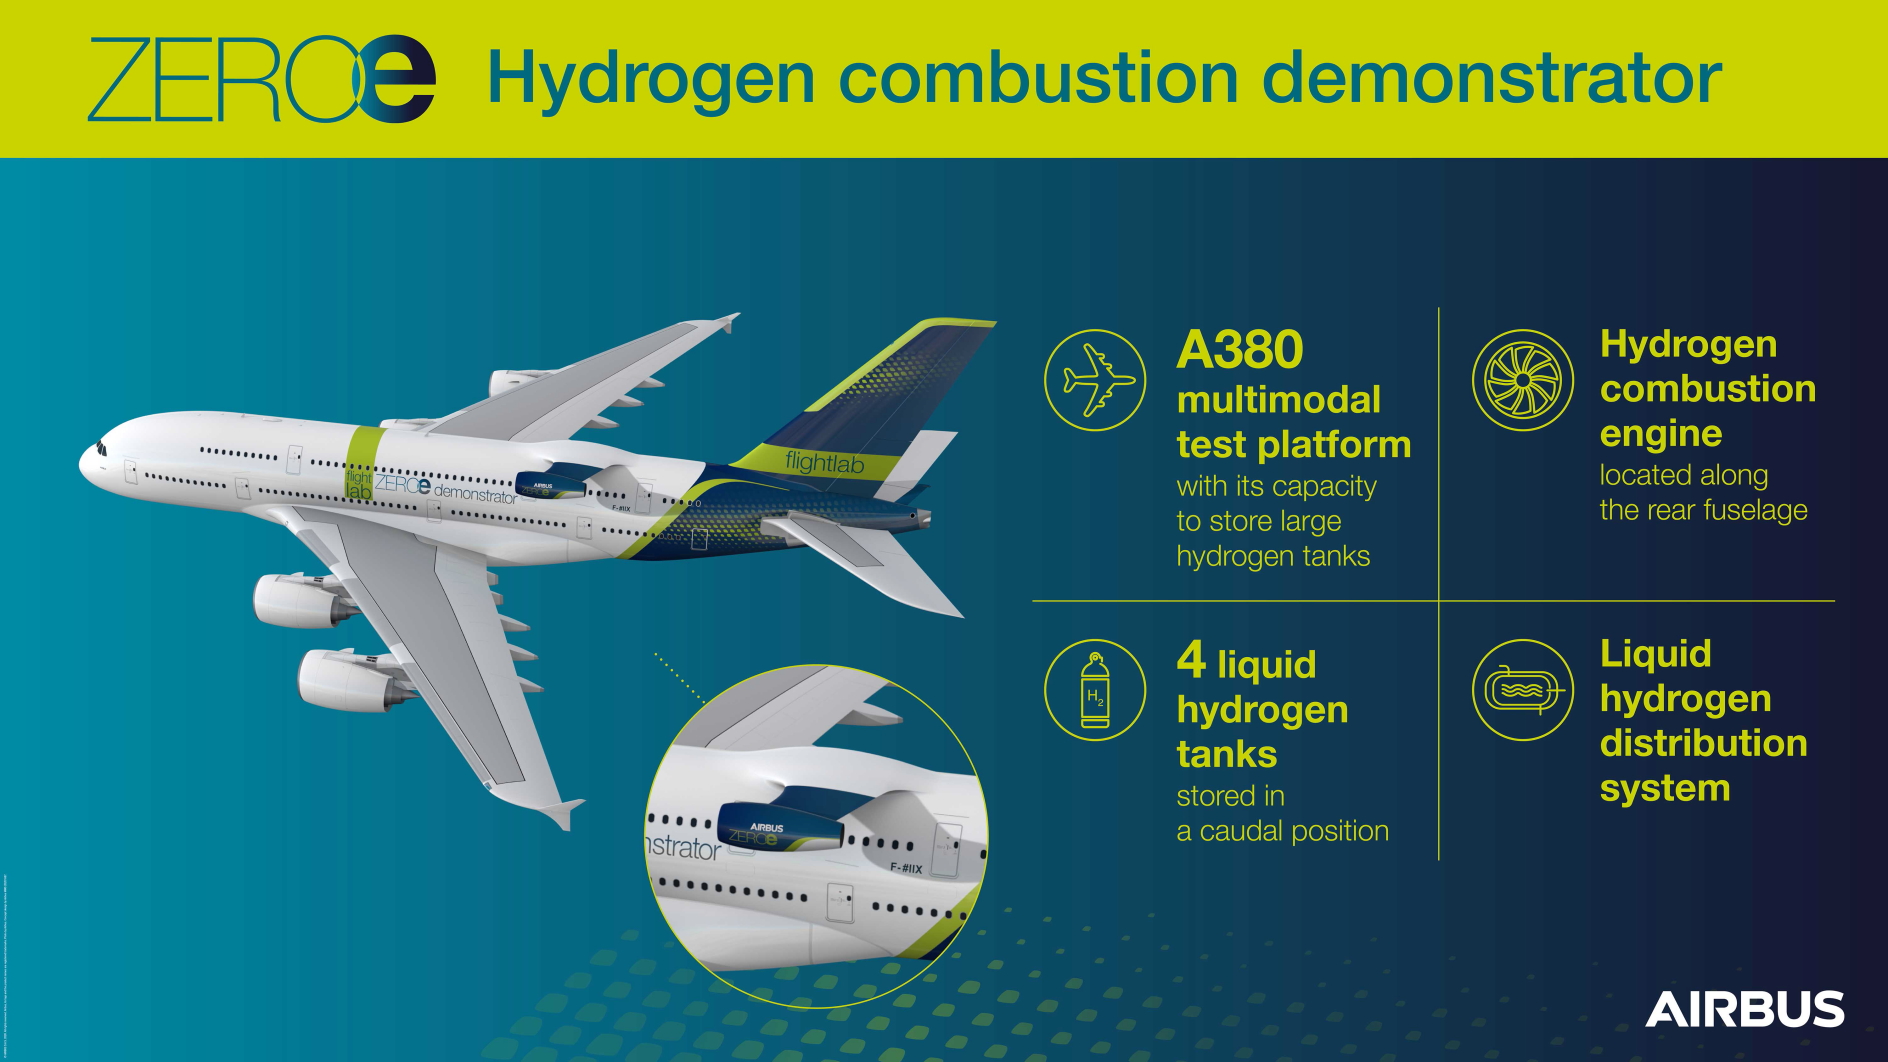 Airbus and CFM are working together on a direct combustion engine fuelled by hydrogen. Click to enlarge.